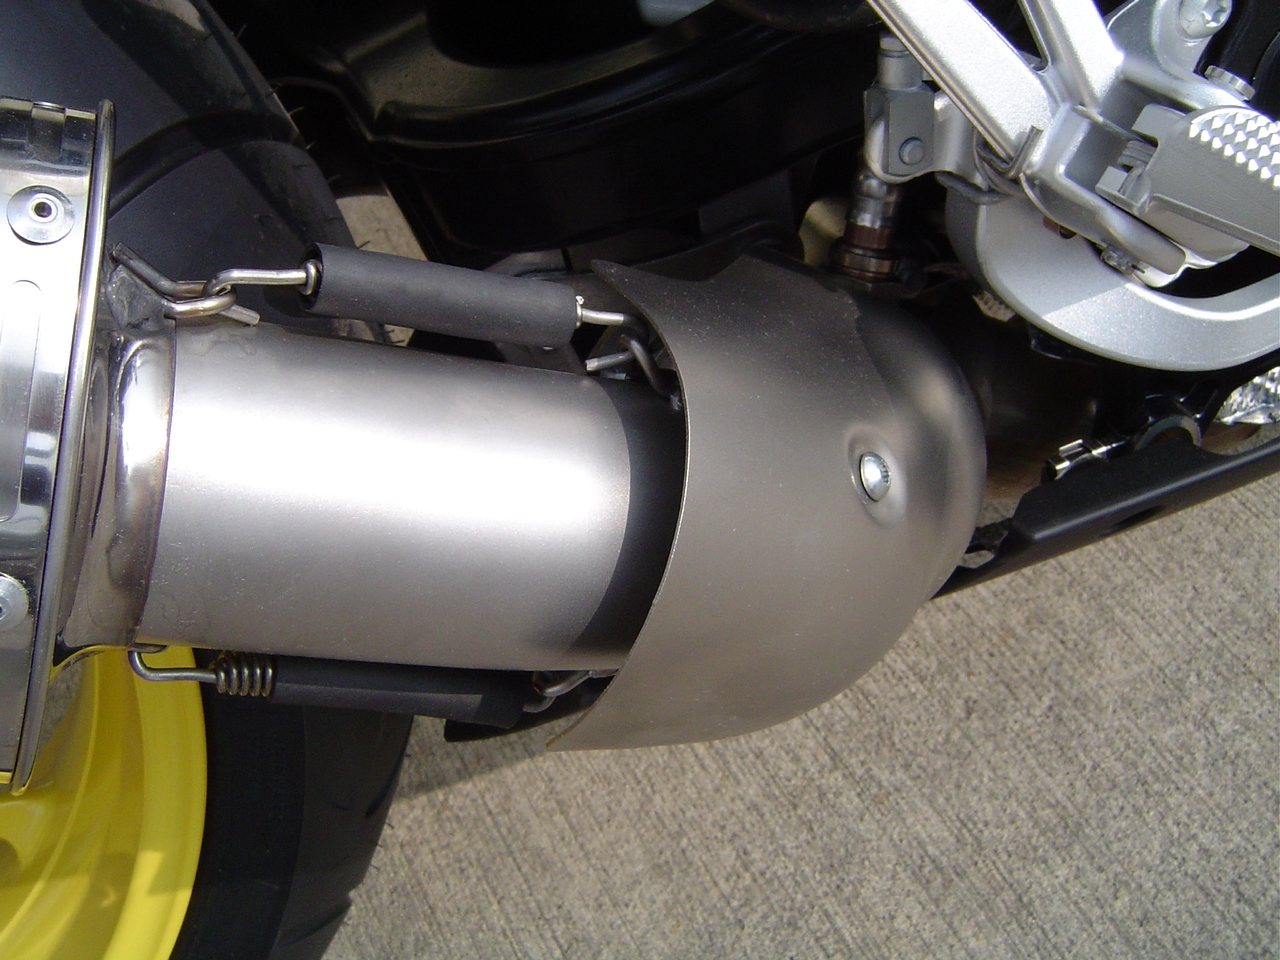 Exhaust system compatible with Bmw K 1300 Gt 2009-2011, Albus Ceramic, Homologated legal slip-on exhaust including removable db killer, link pipe and catalyst 